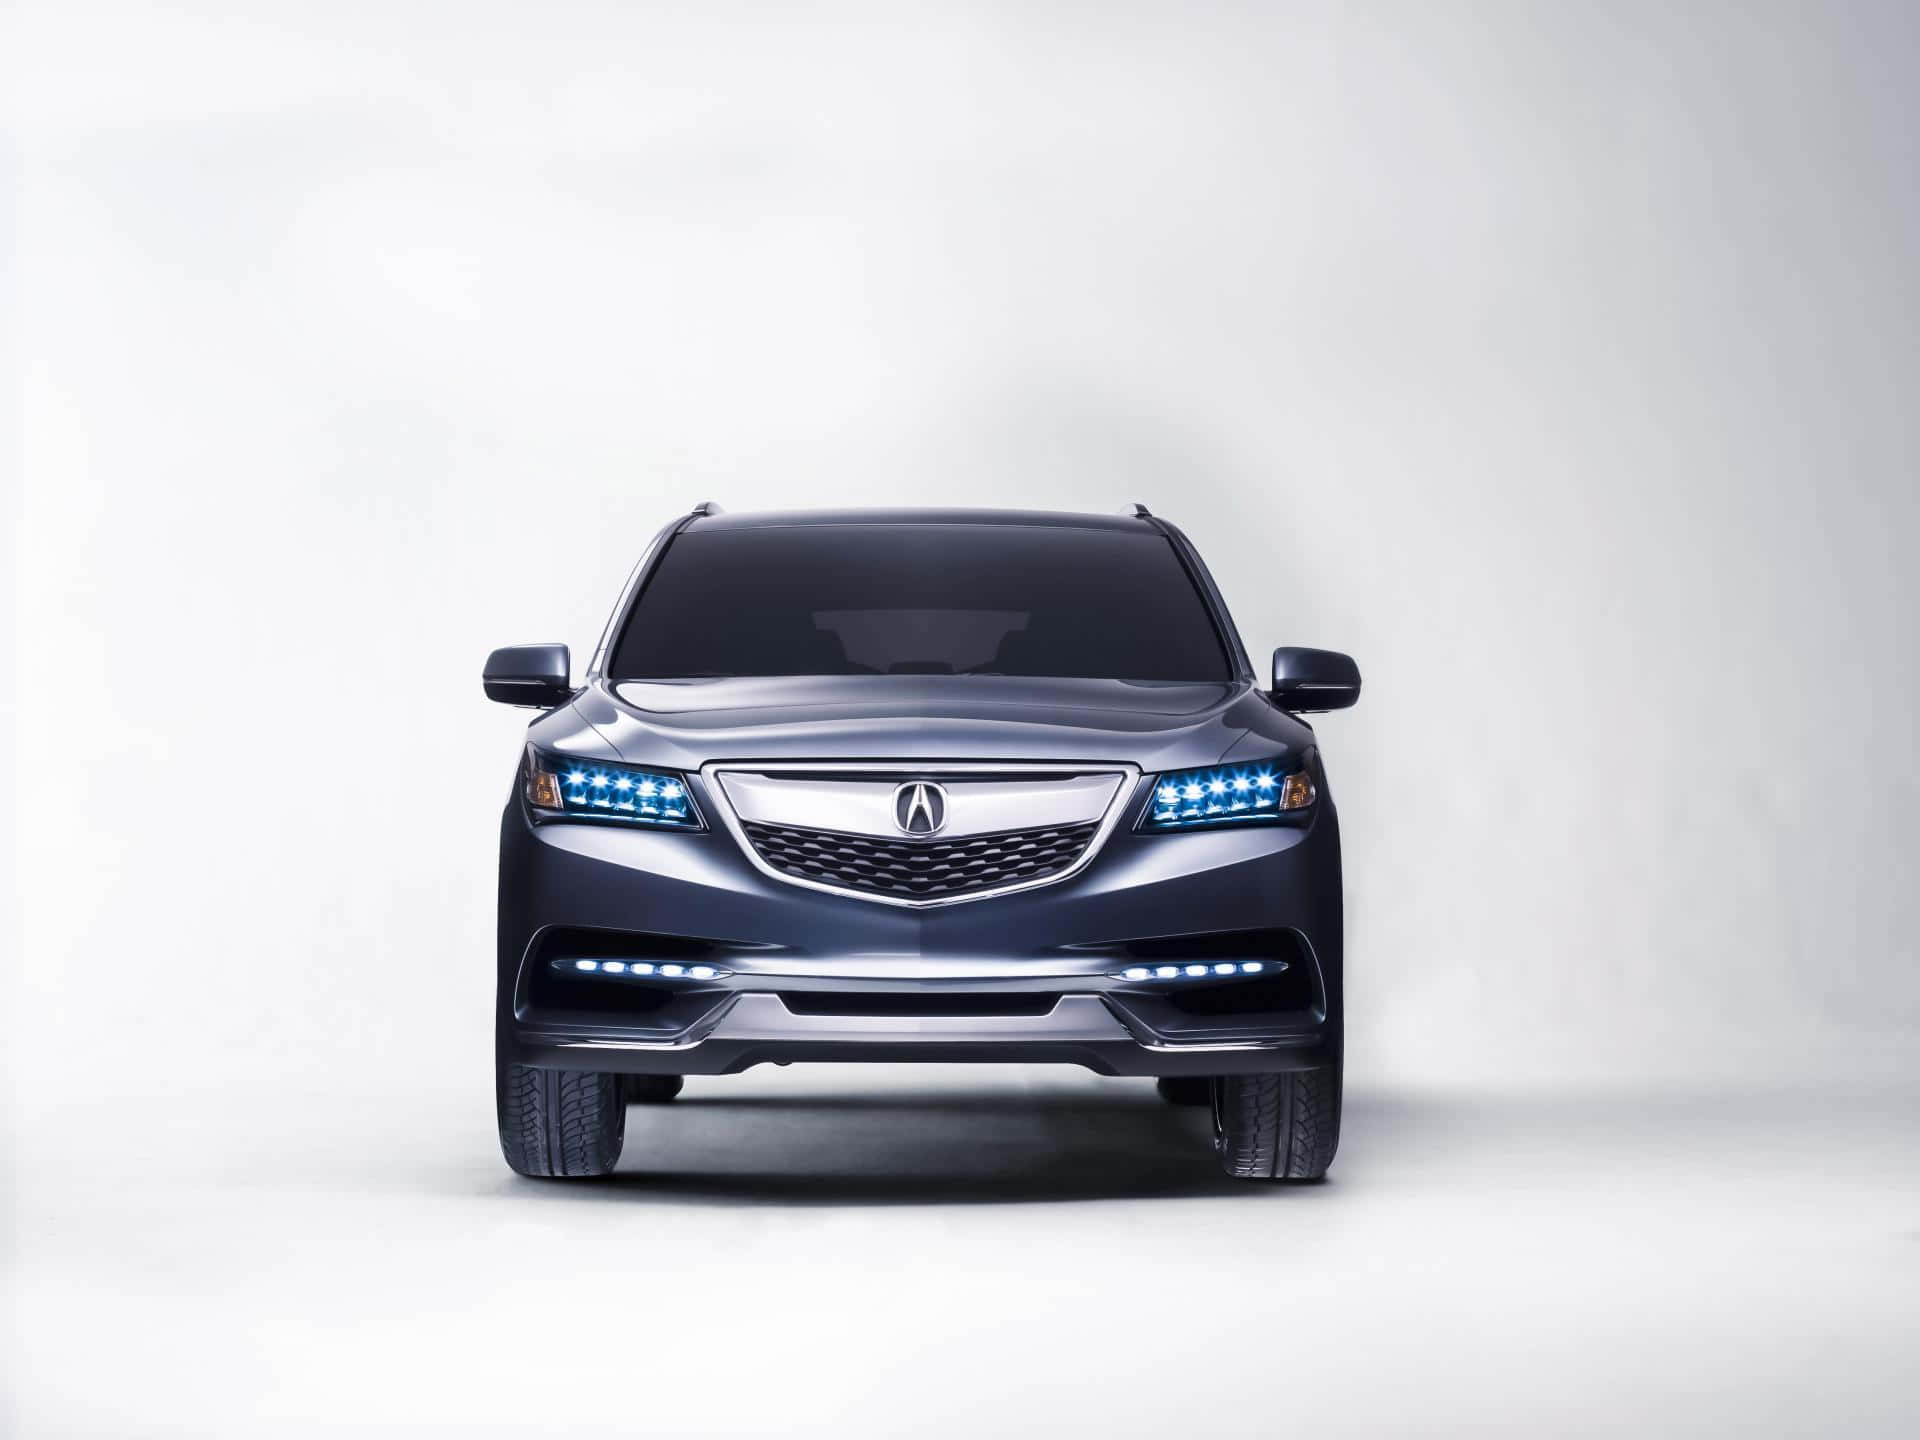 Luxury at its Best - Acura MDX SUV Wallpaper